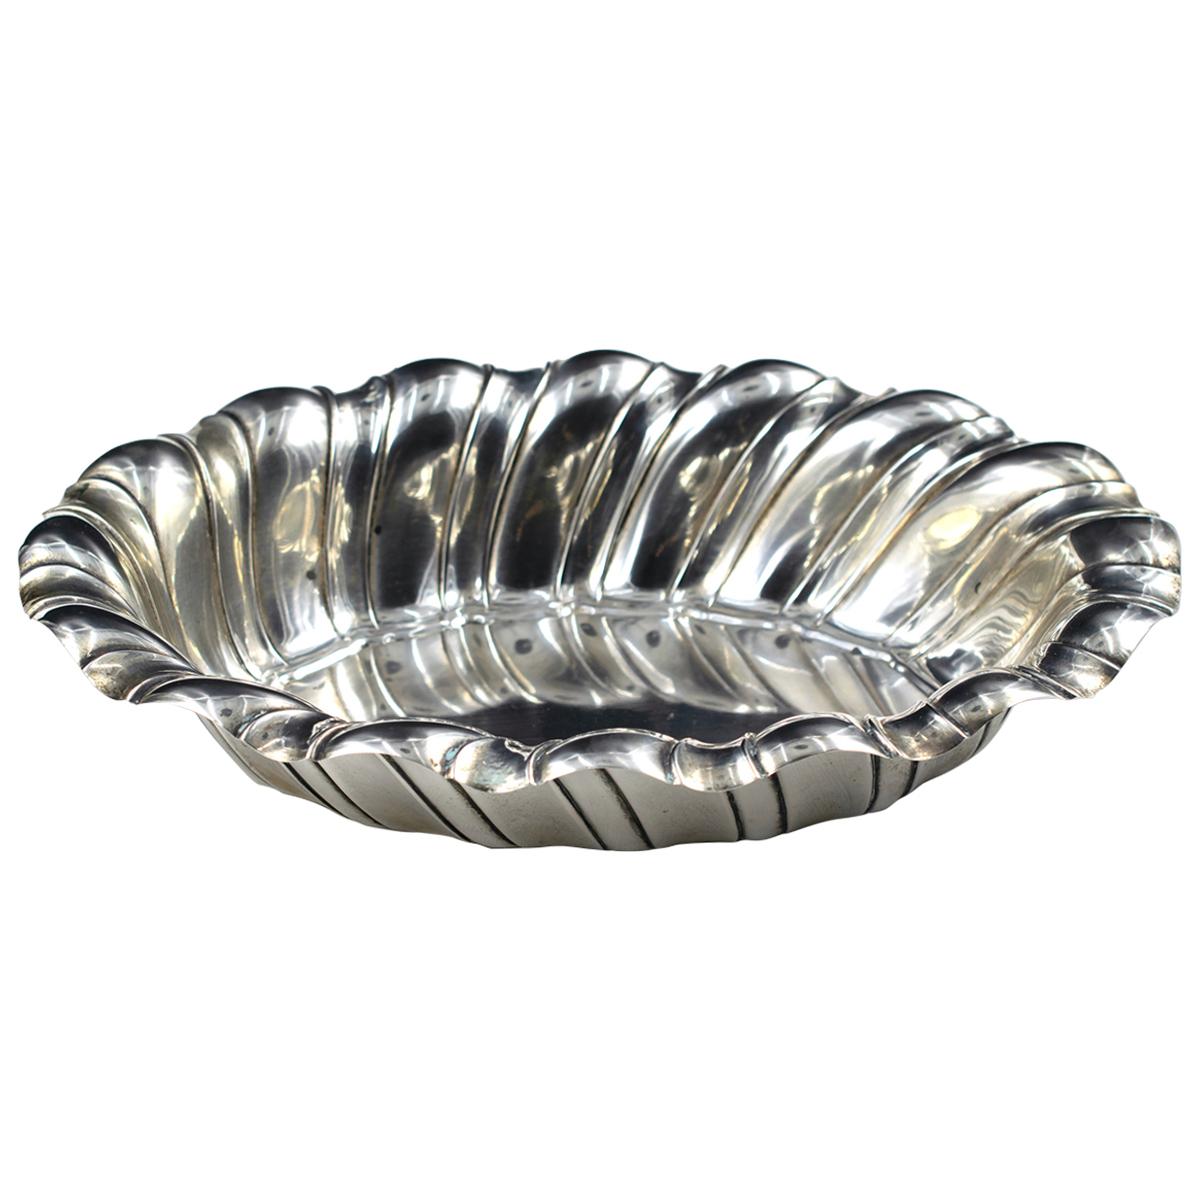 Silver Oval Centerpiece, Italy, Mid-20th Century